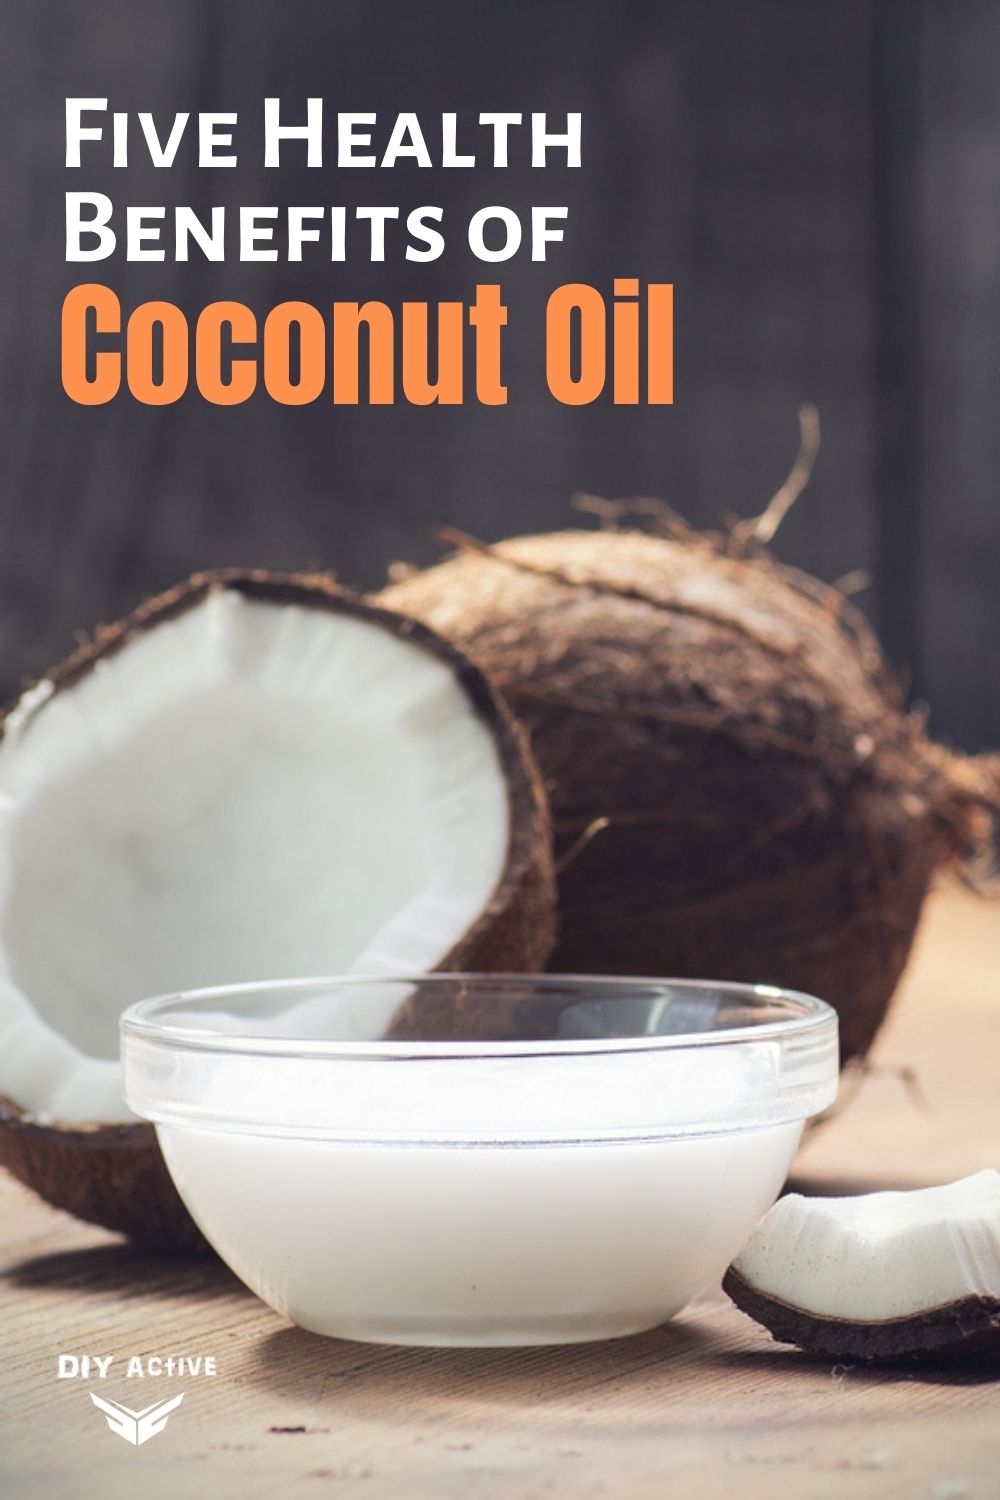 5 Day Coconut oil after workout for Beginner